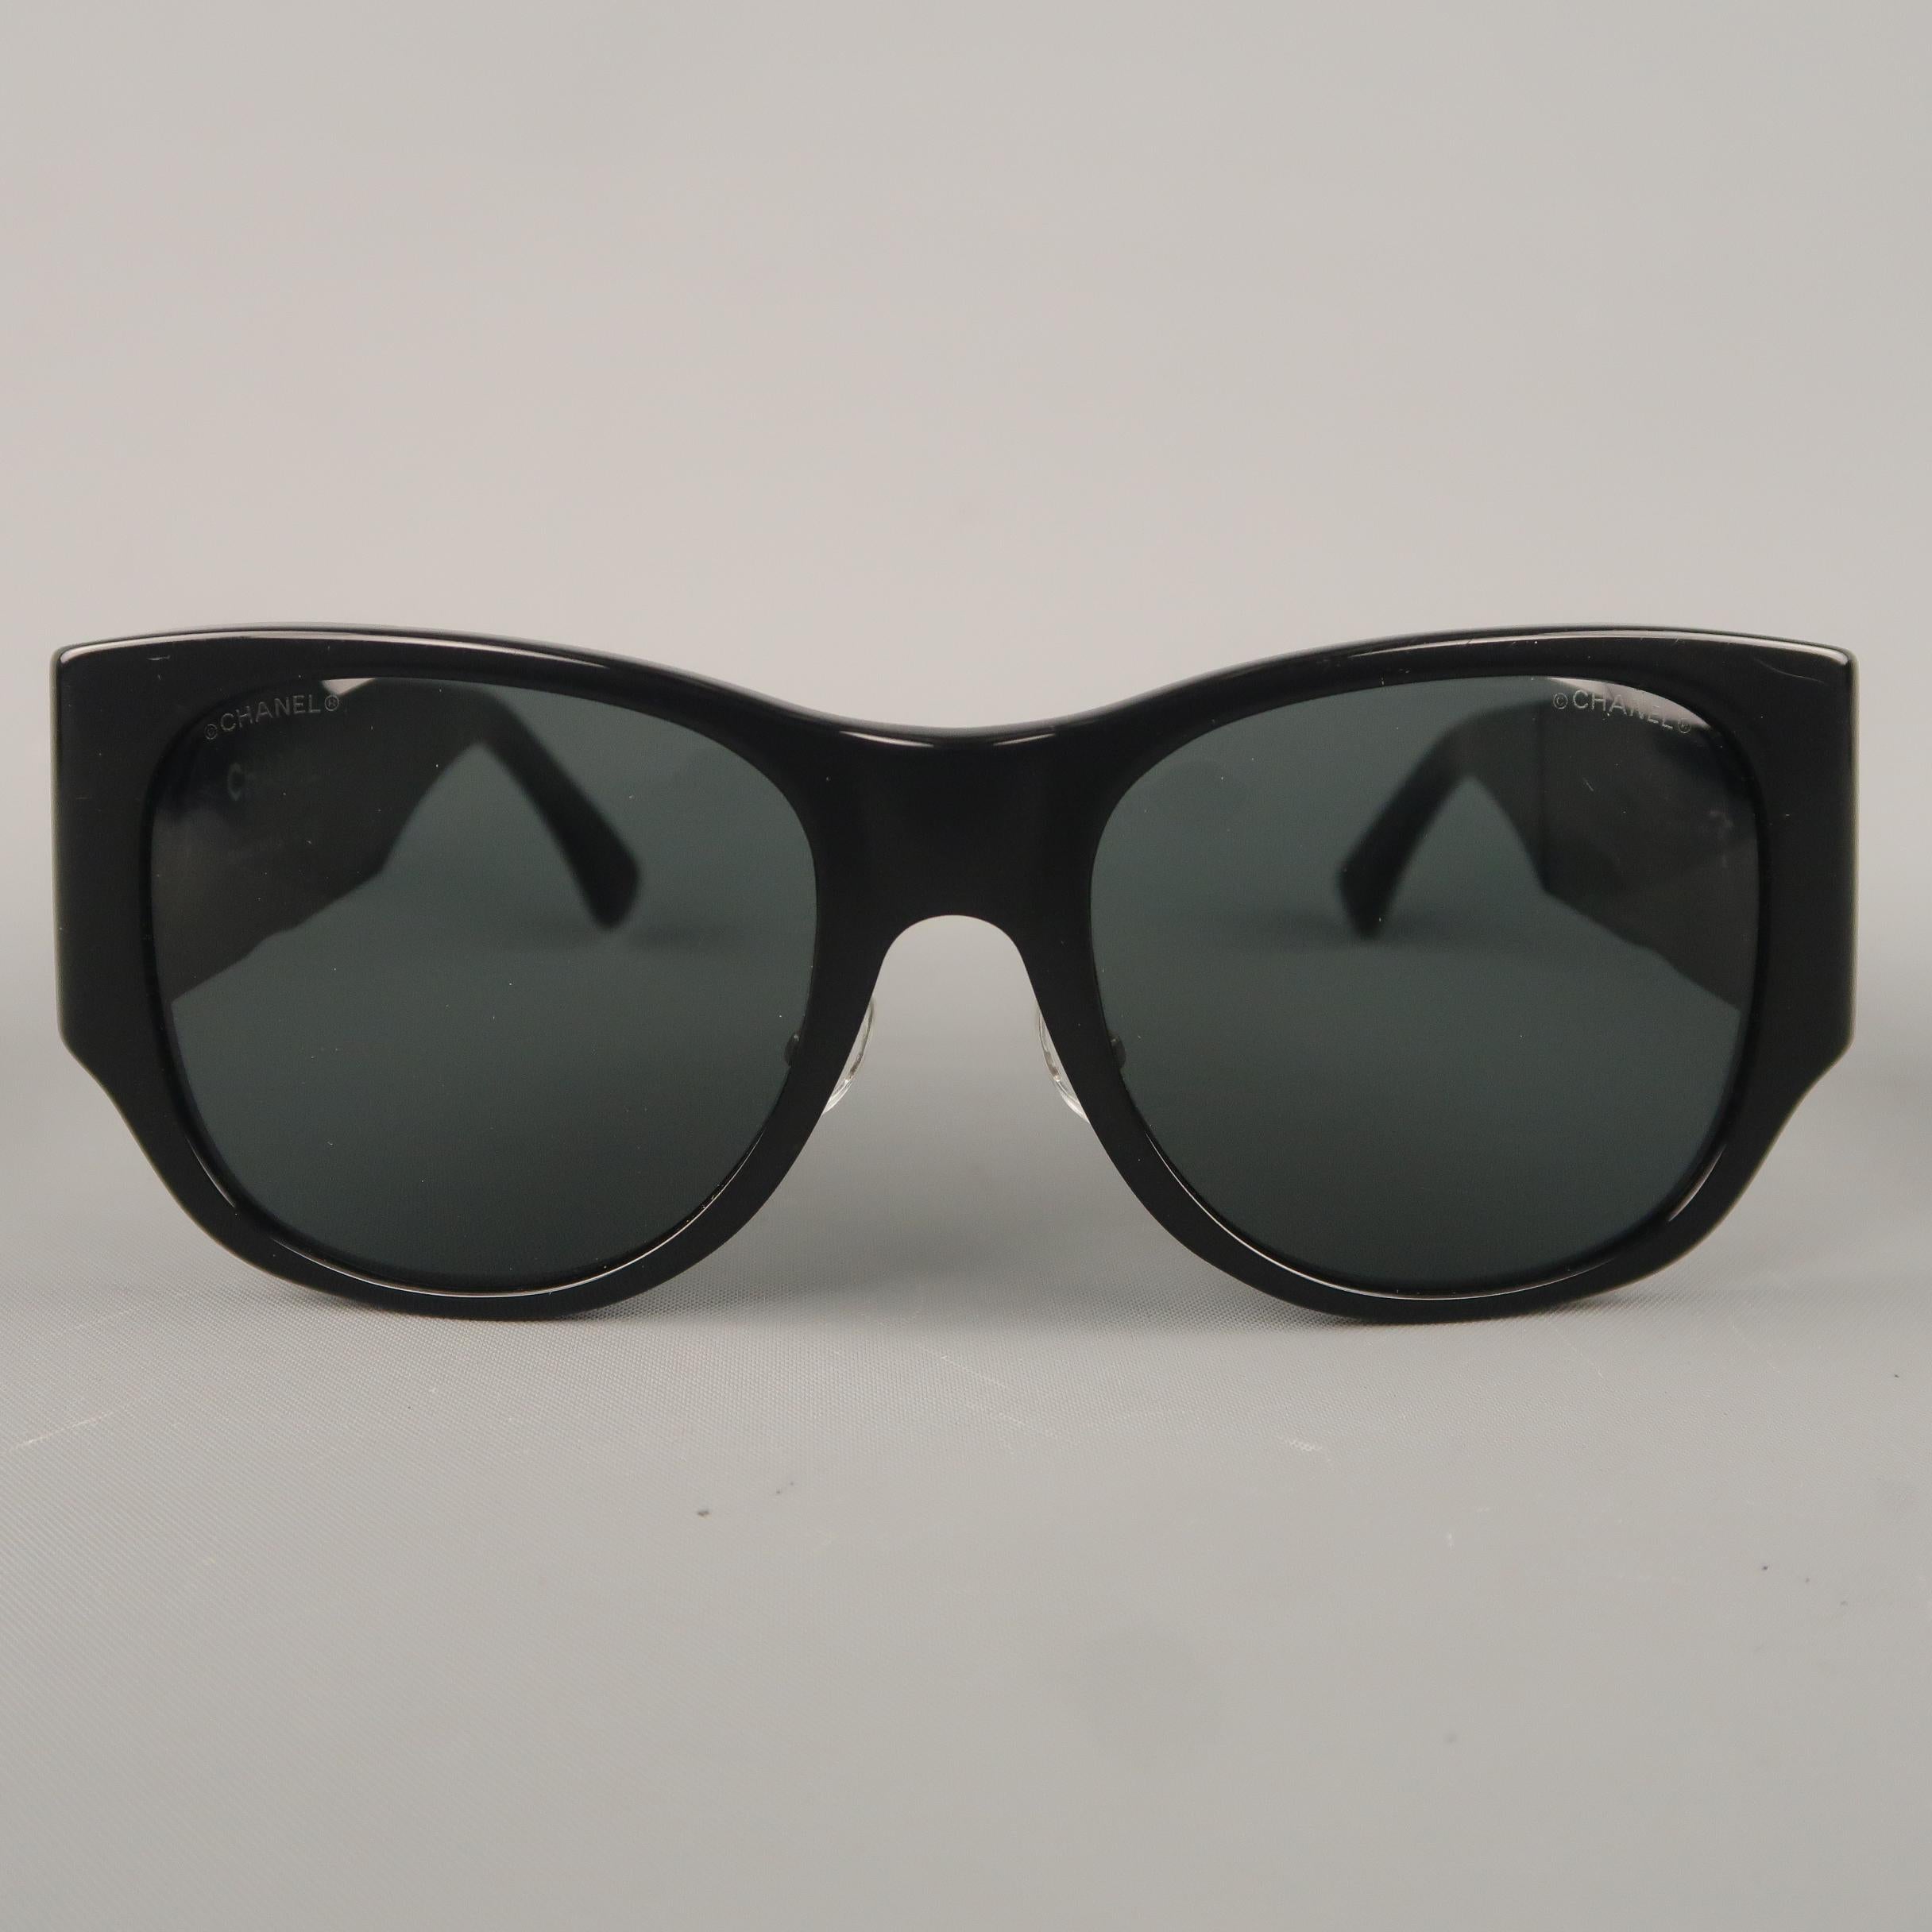 Vintage 1990's CHANEL sunglasses come in black acetate with large black lenses and thick arms detailed with quilted leather panels that flip up to reveal hidden logo mirrors. Minor wear on leather. As-is.  With Case. Made in France.
 
Good Pre-Owned